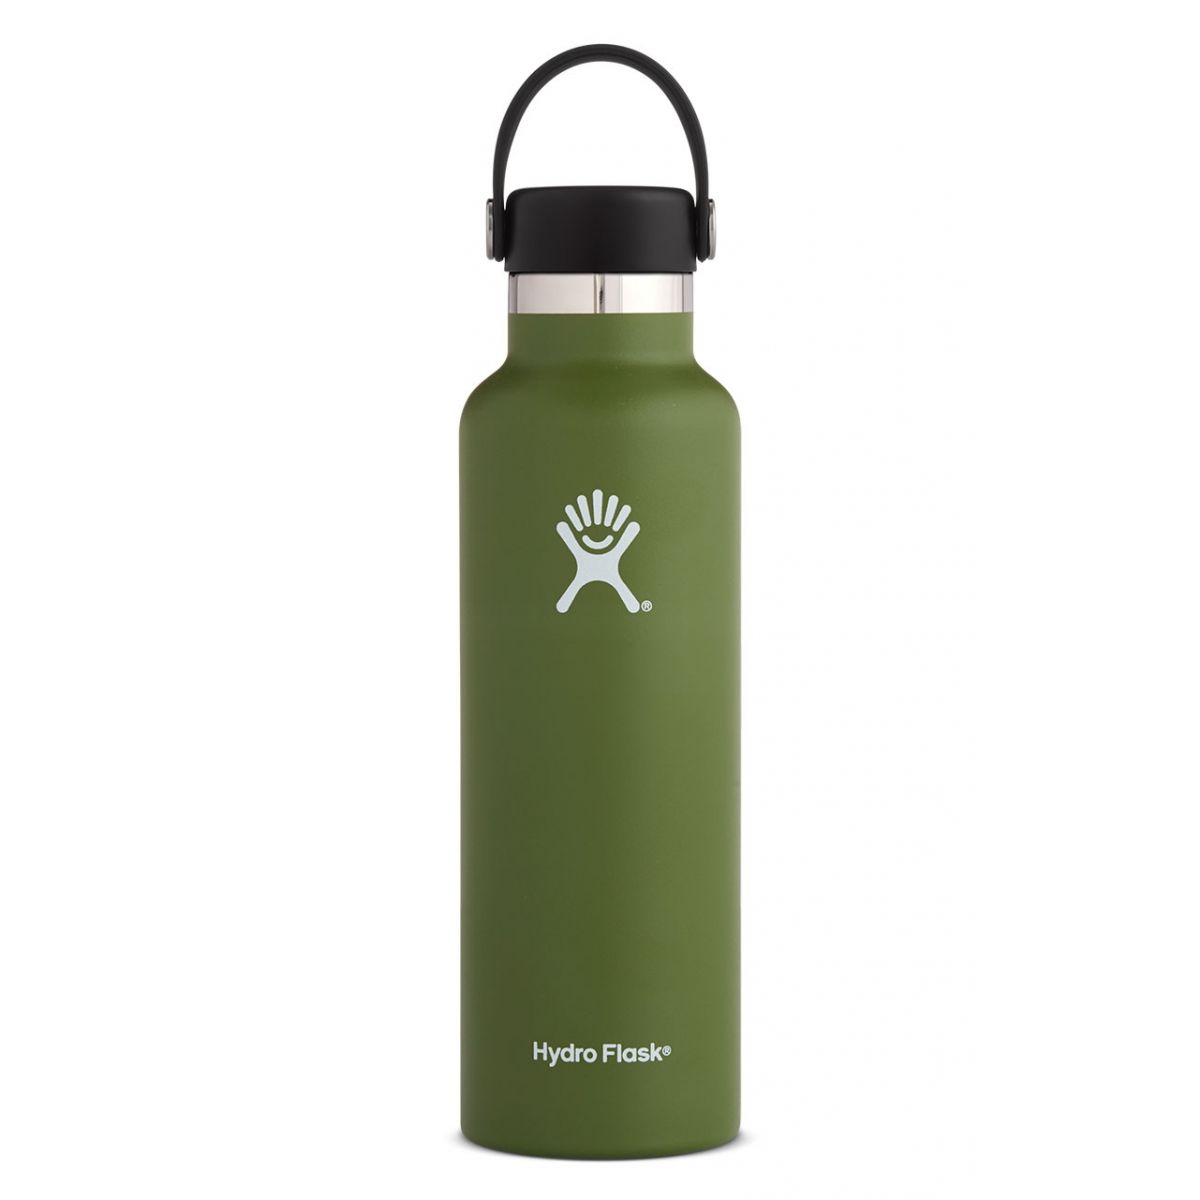 hydroflask stainless steel water bottle 21 oz in olive